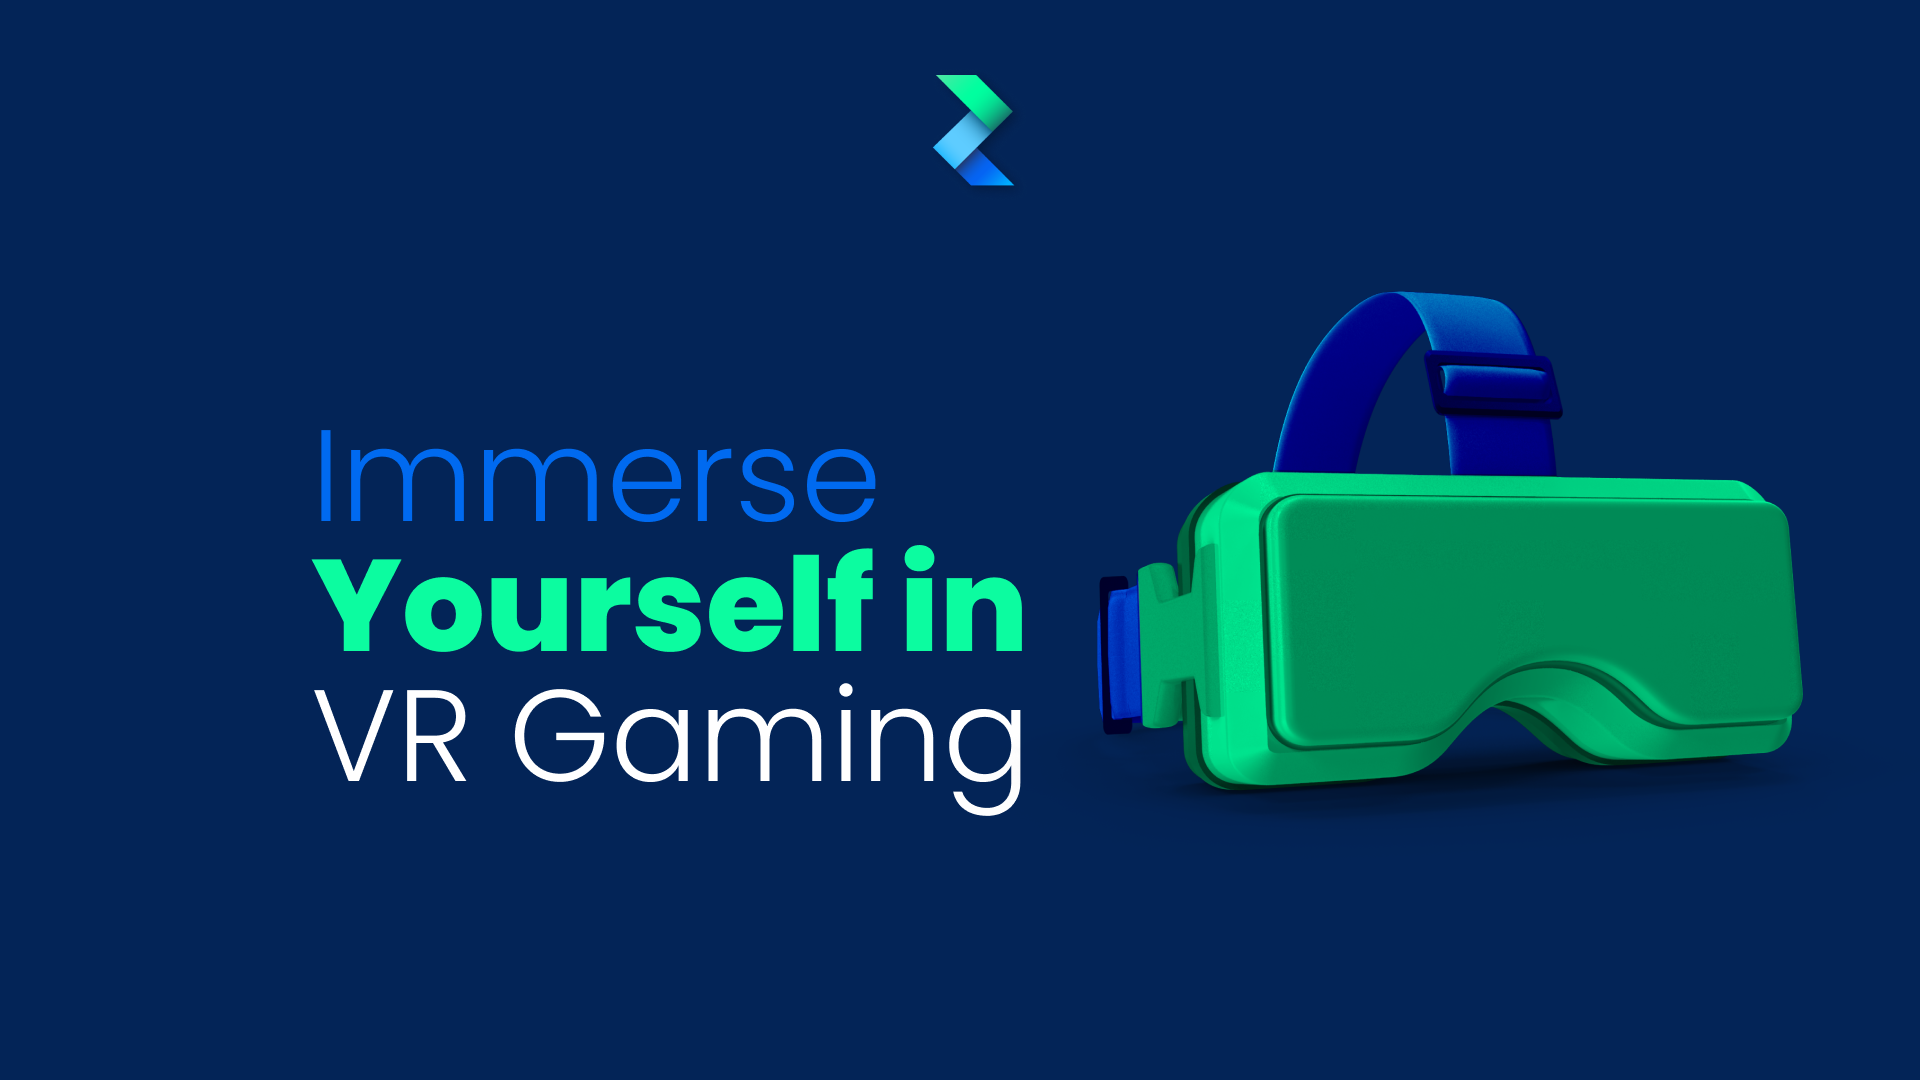 Immerse Yourself in VR